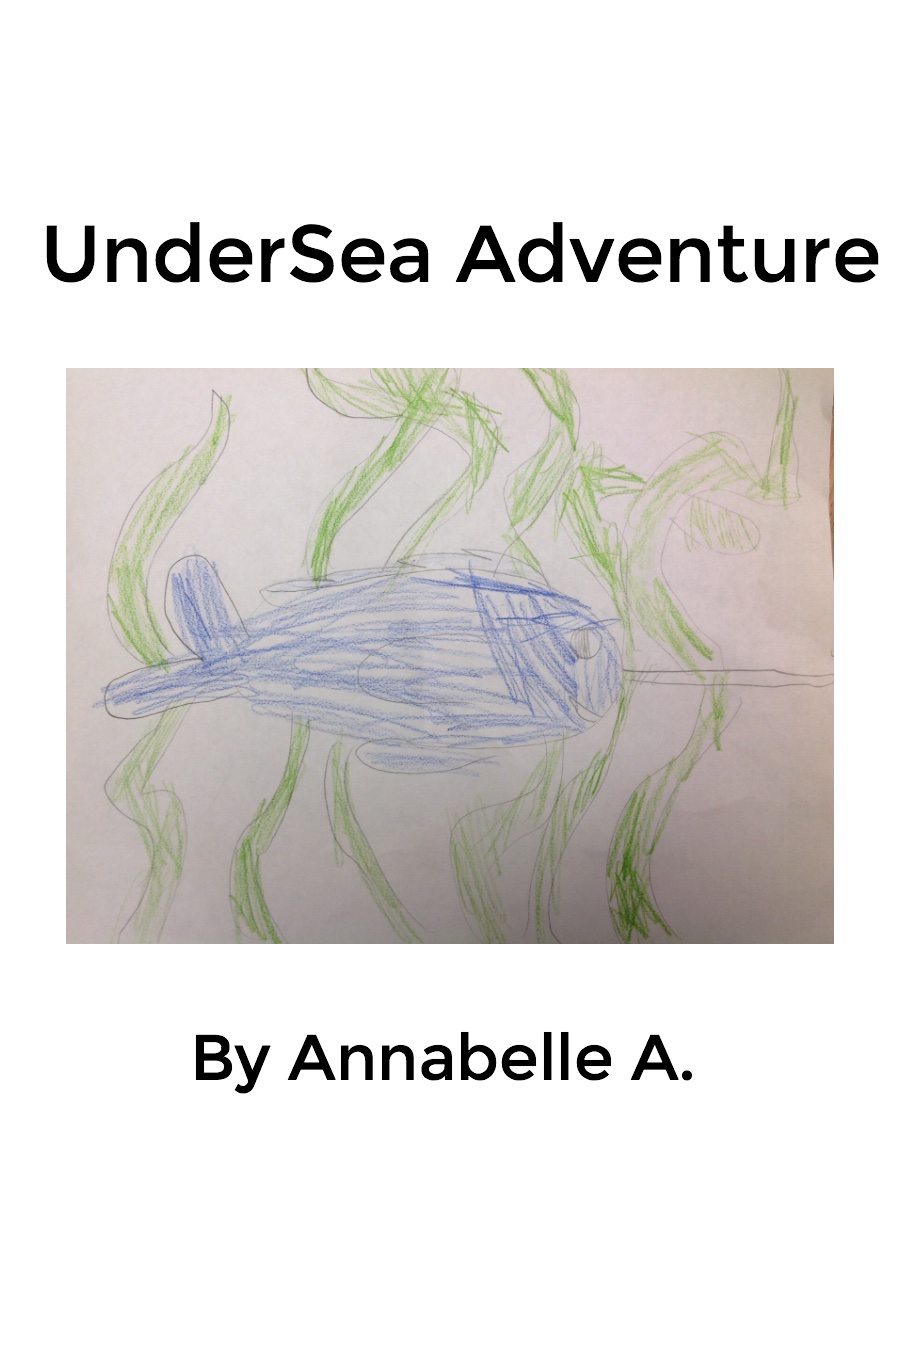 Undersea Adventure by Annabelle A